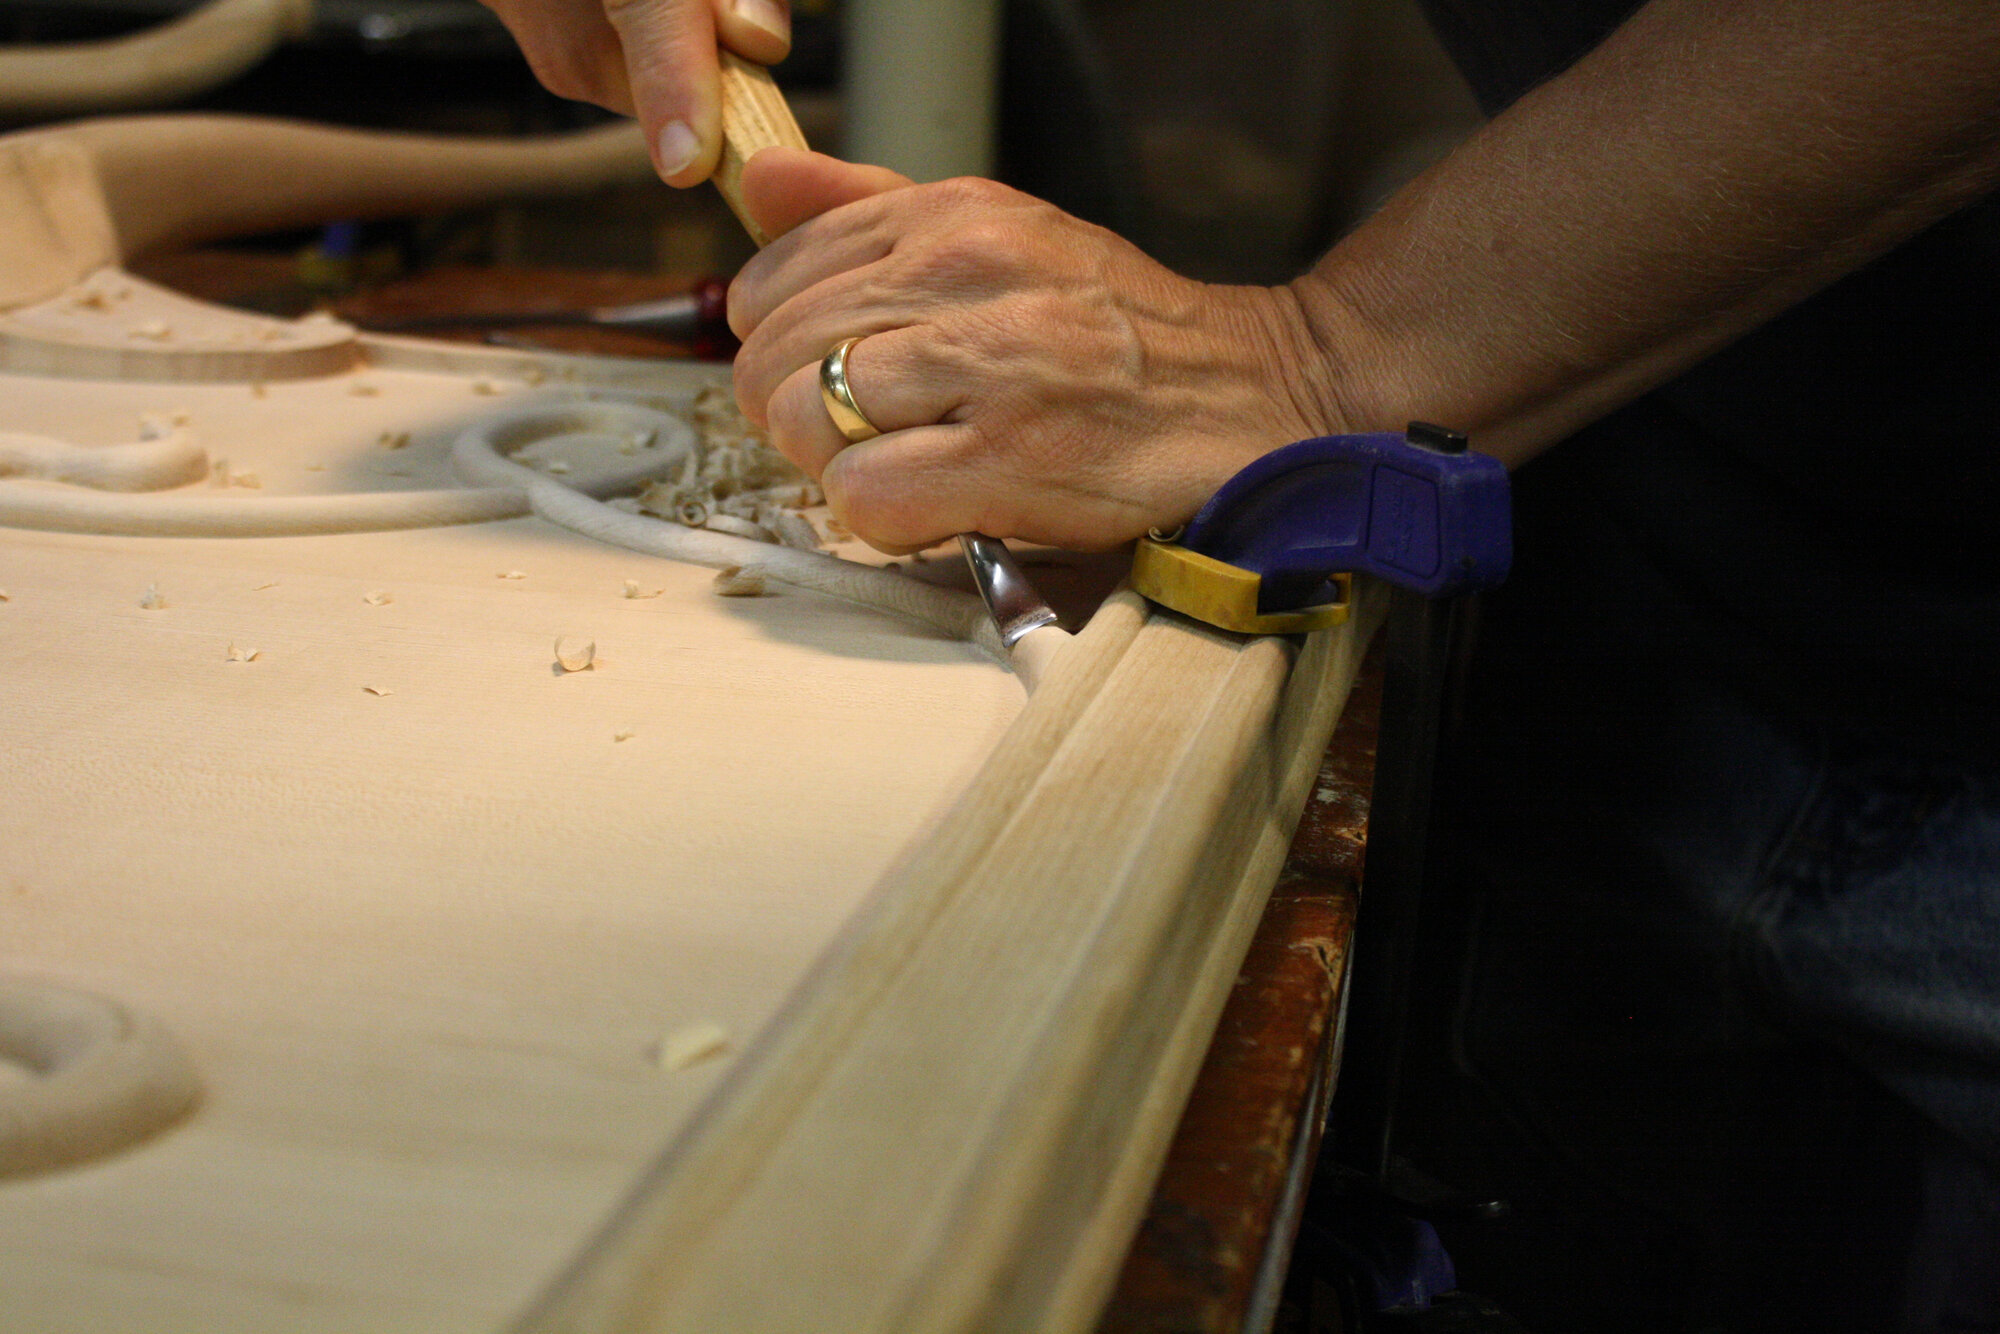 Carving the Thread Chest